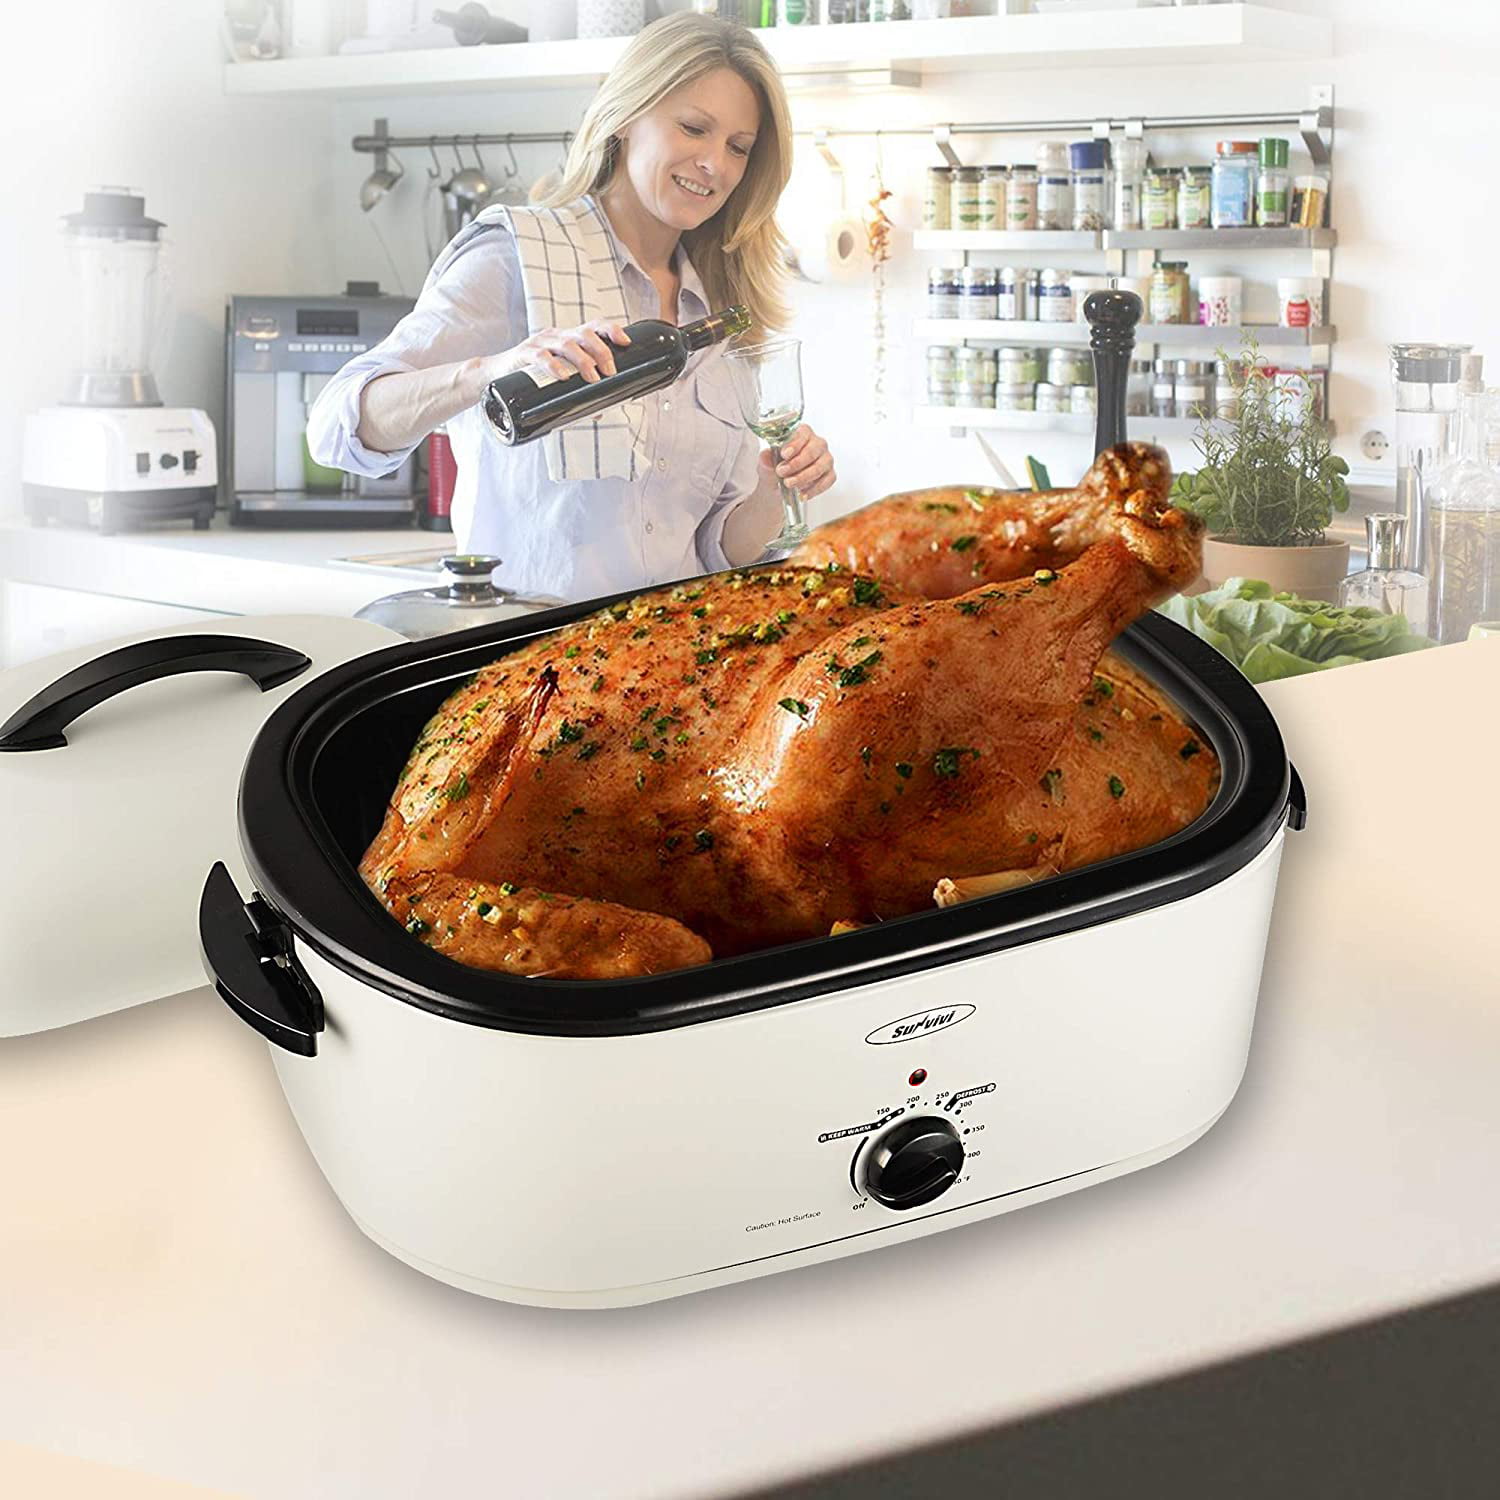 Full-range Temperature Control and Cool-Touch Handles Turkey Roaster Oven with Removable Insert Pot 20 QT, Silver Large Electric Roaster Oven with Self-Basting Lid 